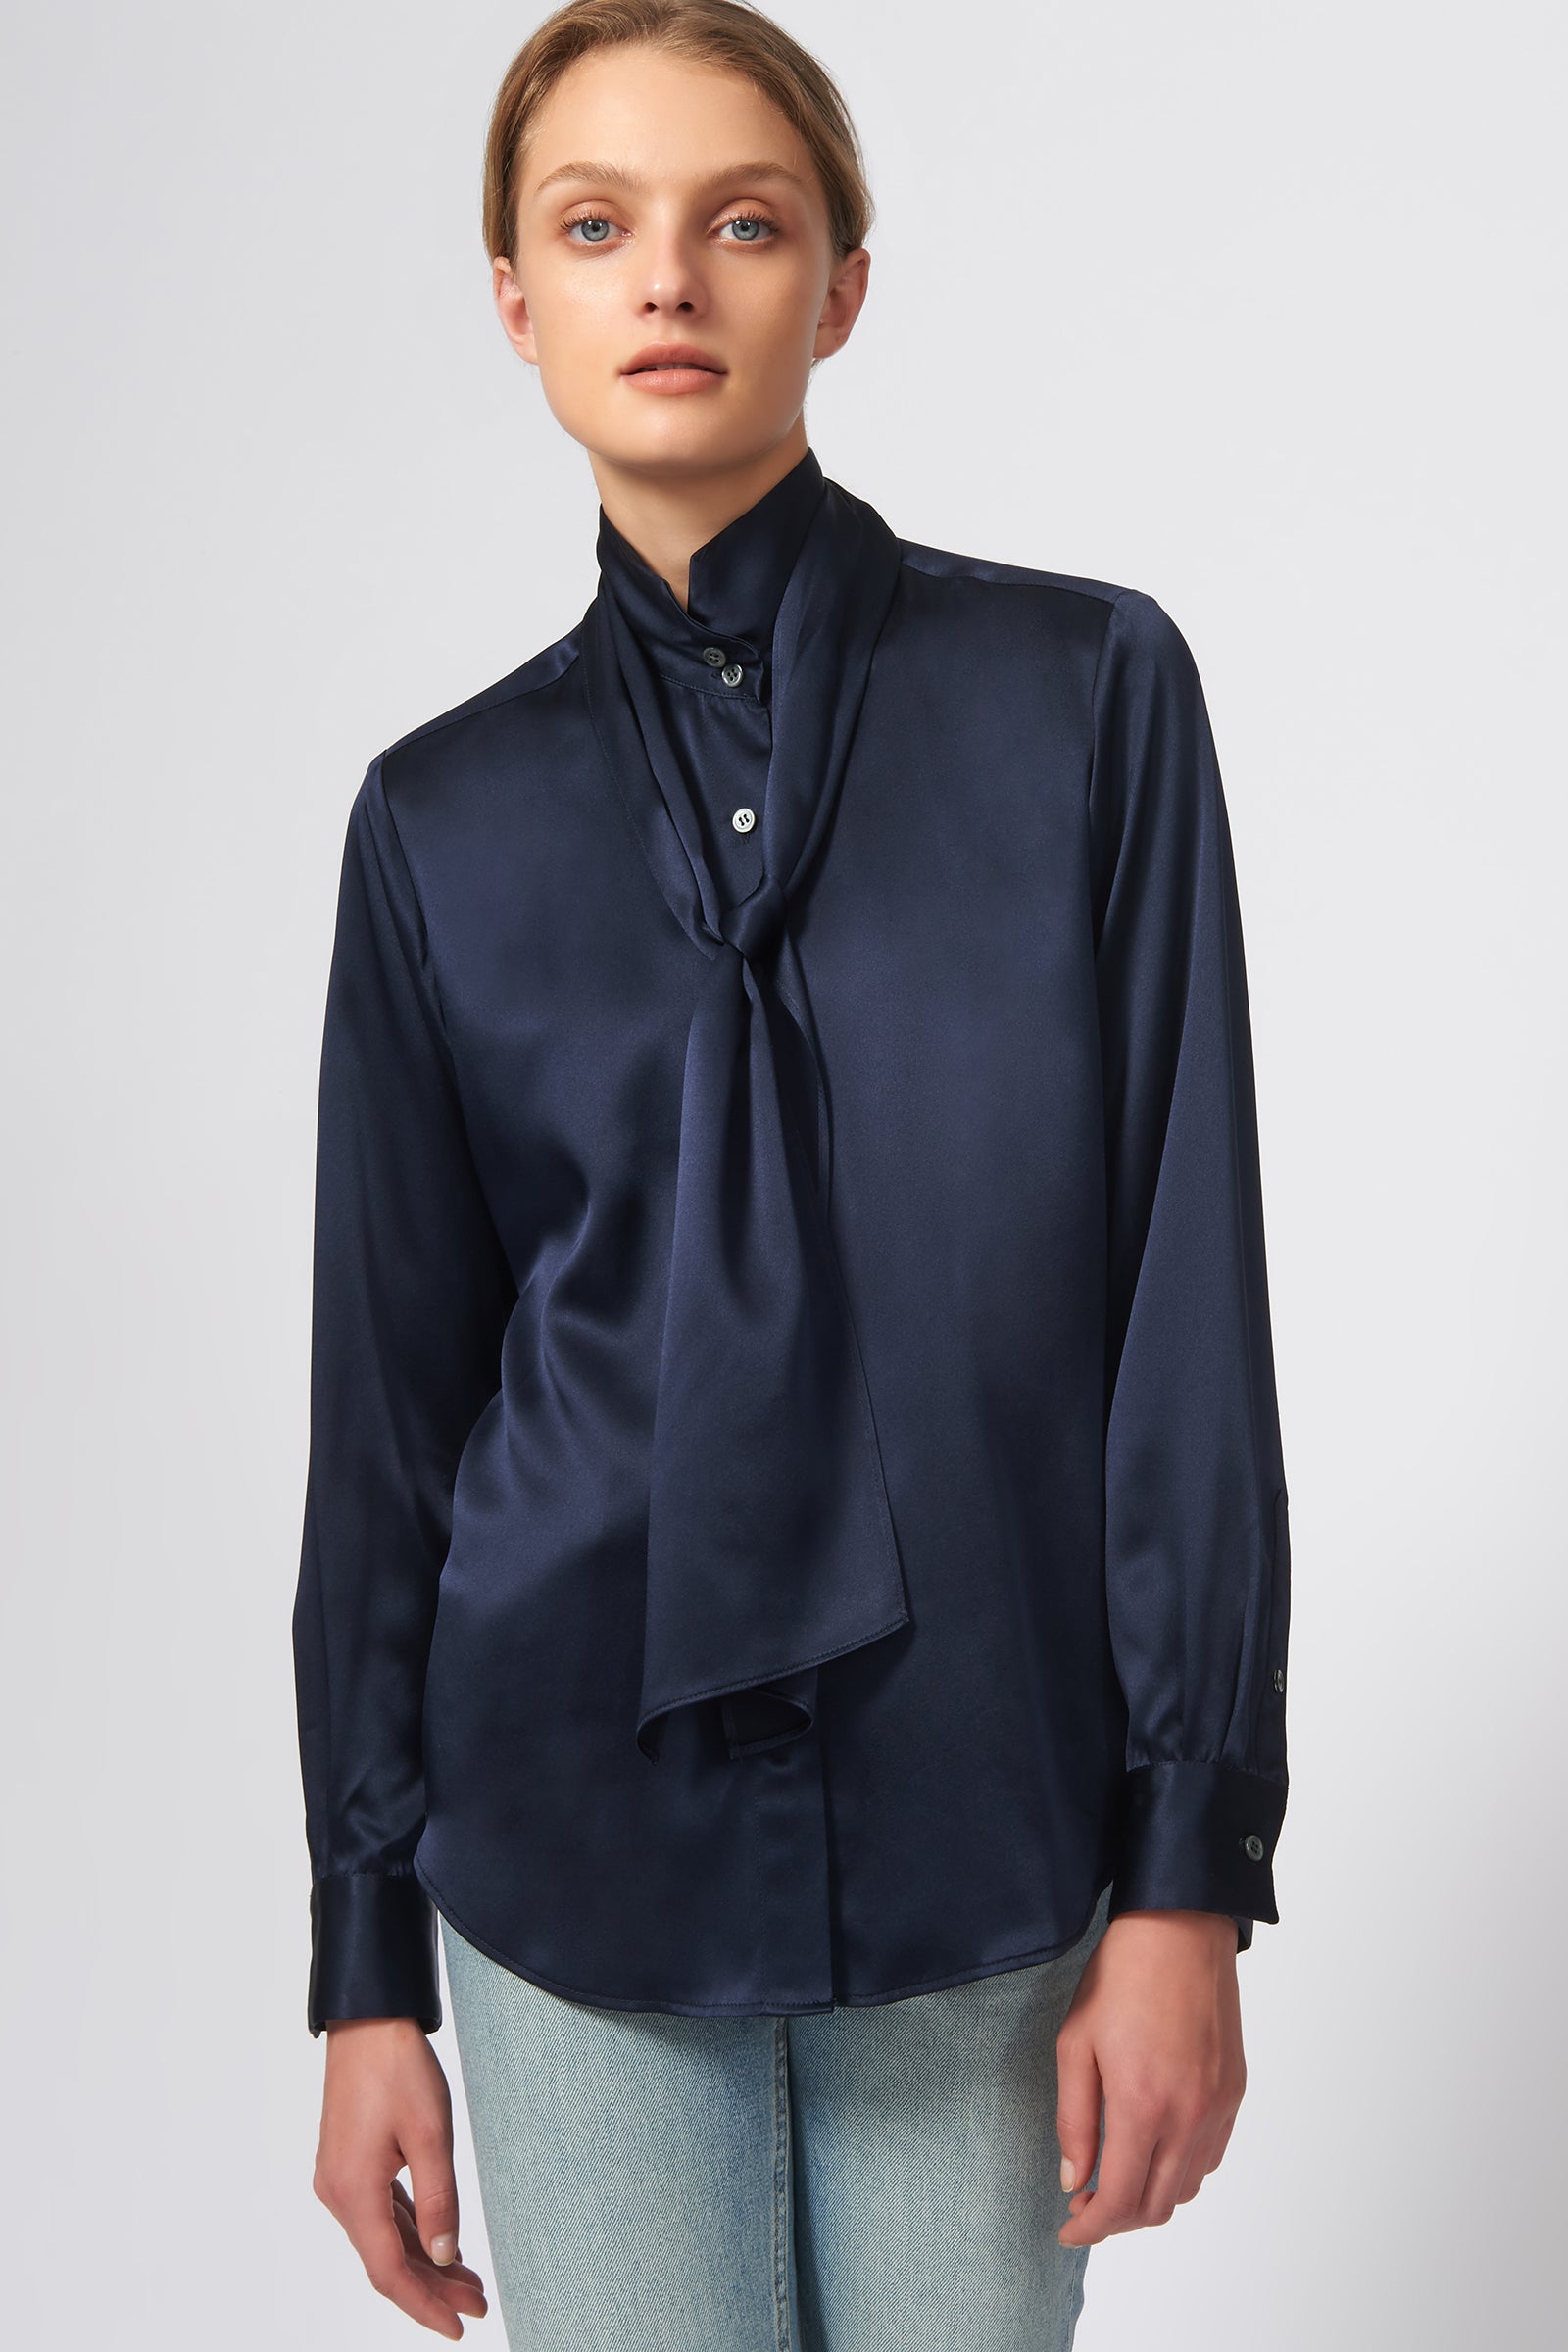 Kal Rieman Scarf Tie Blouse in Navy on Model Front View